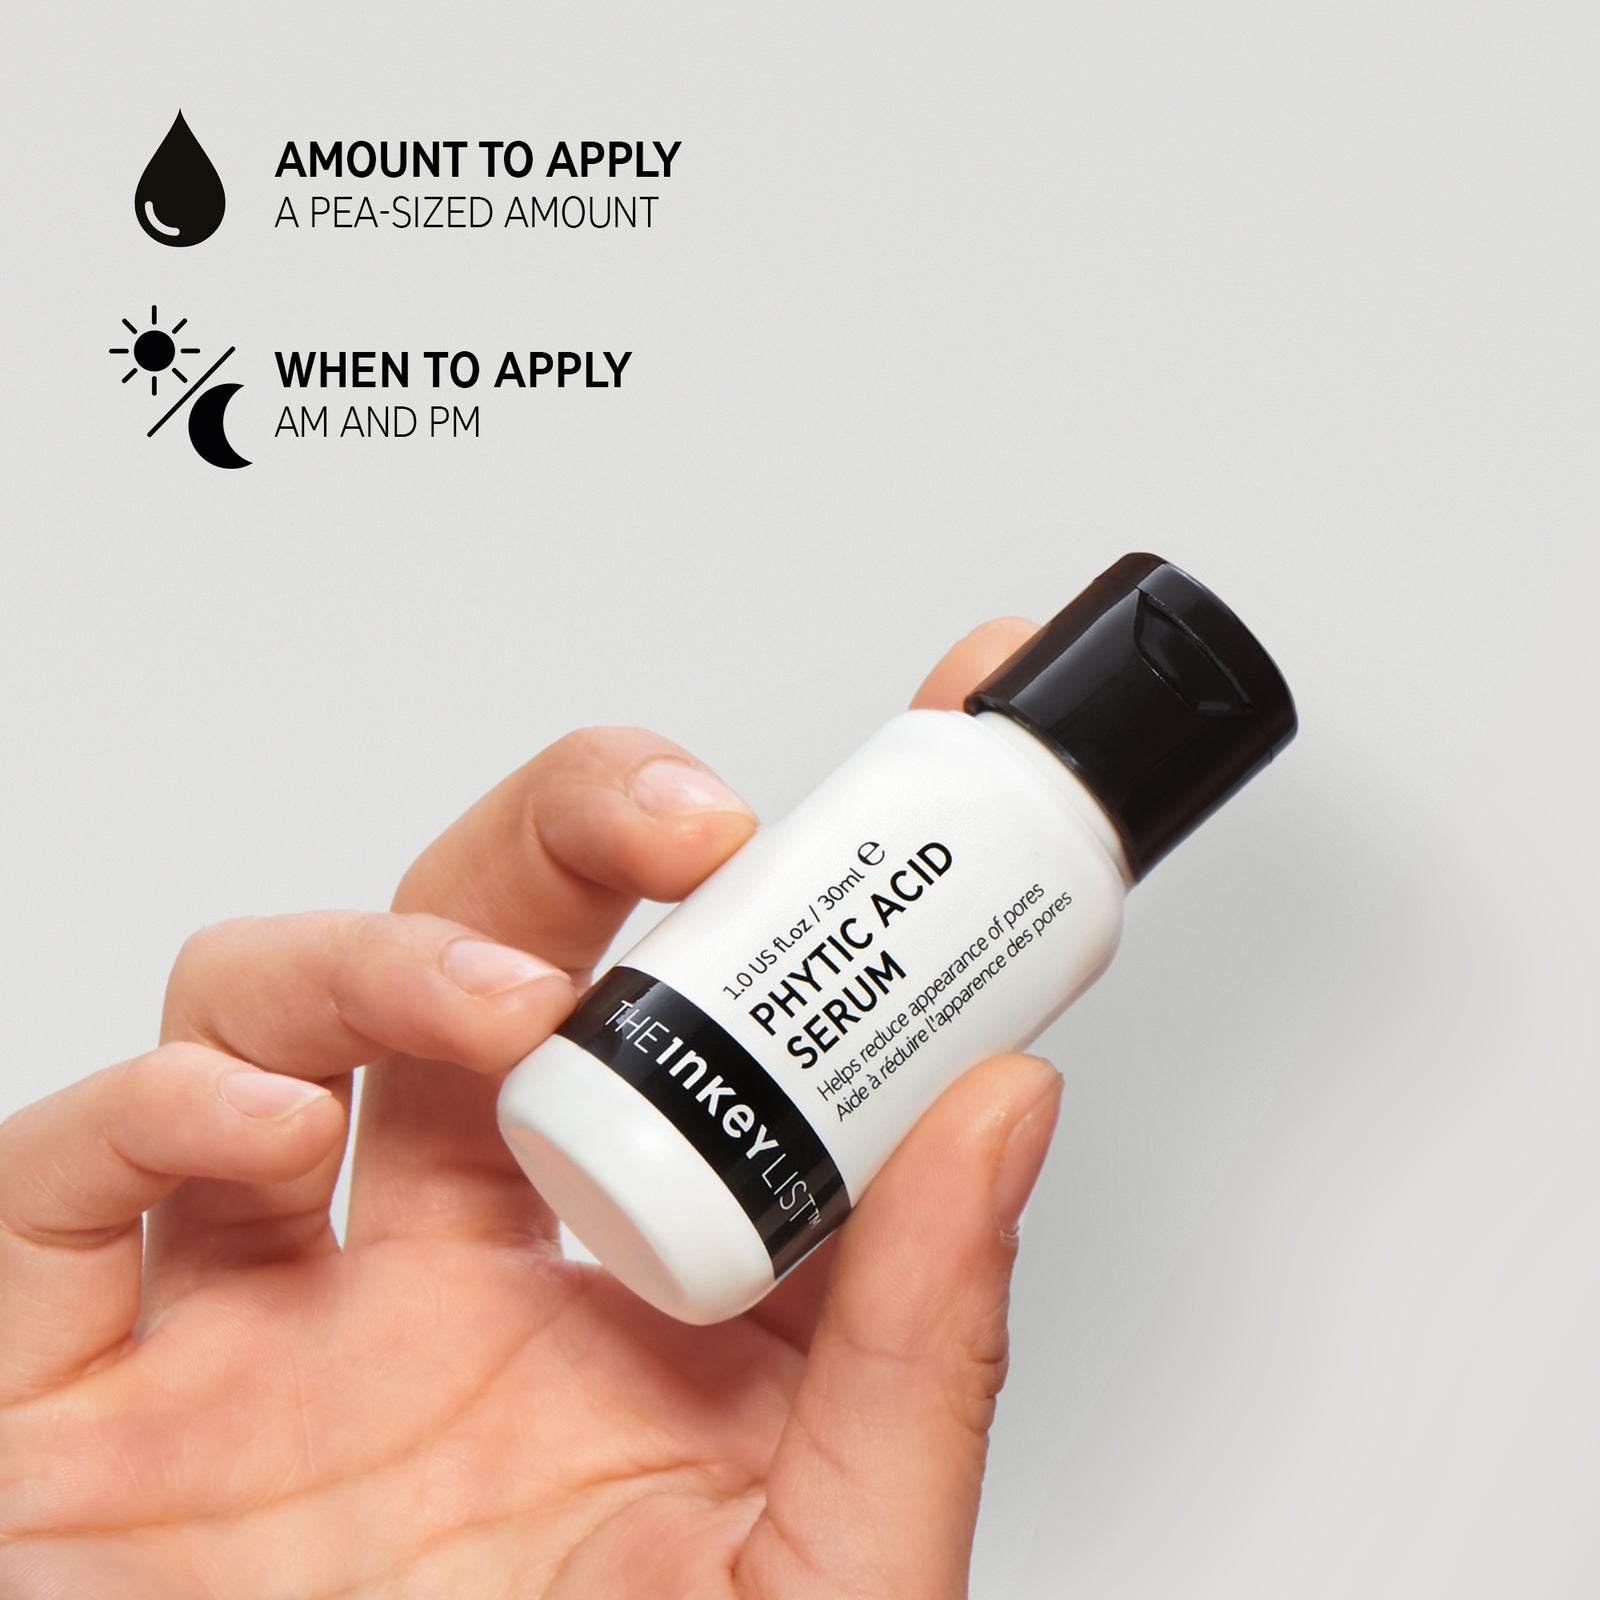 Hand holding Phytic Acid Serum with black text explaining how and when to use it with text 'Amount to apply (pea-sized amount)' and 'When to apply (AM and PM)'